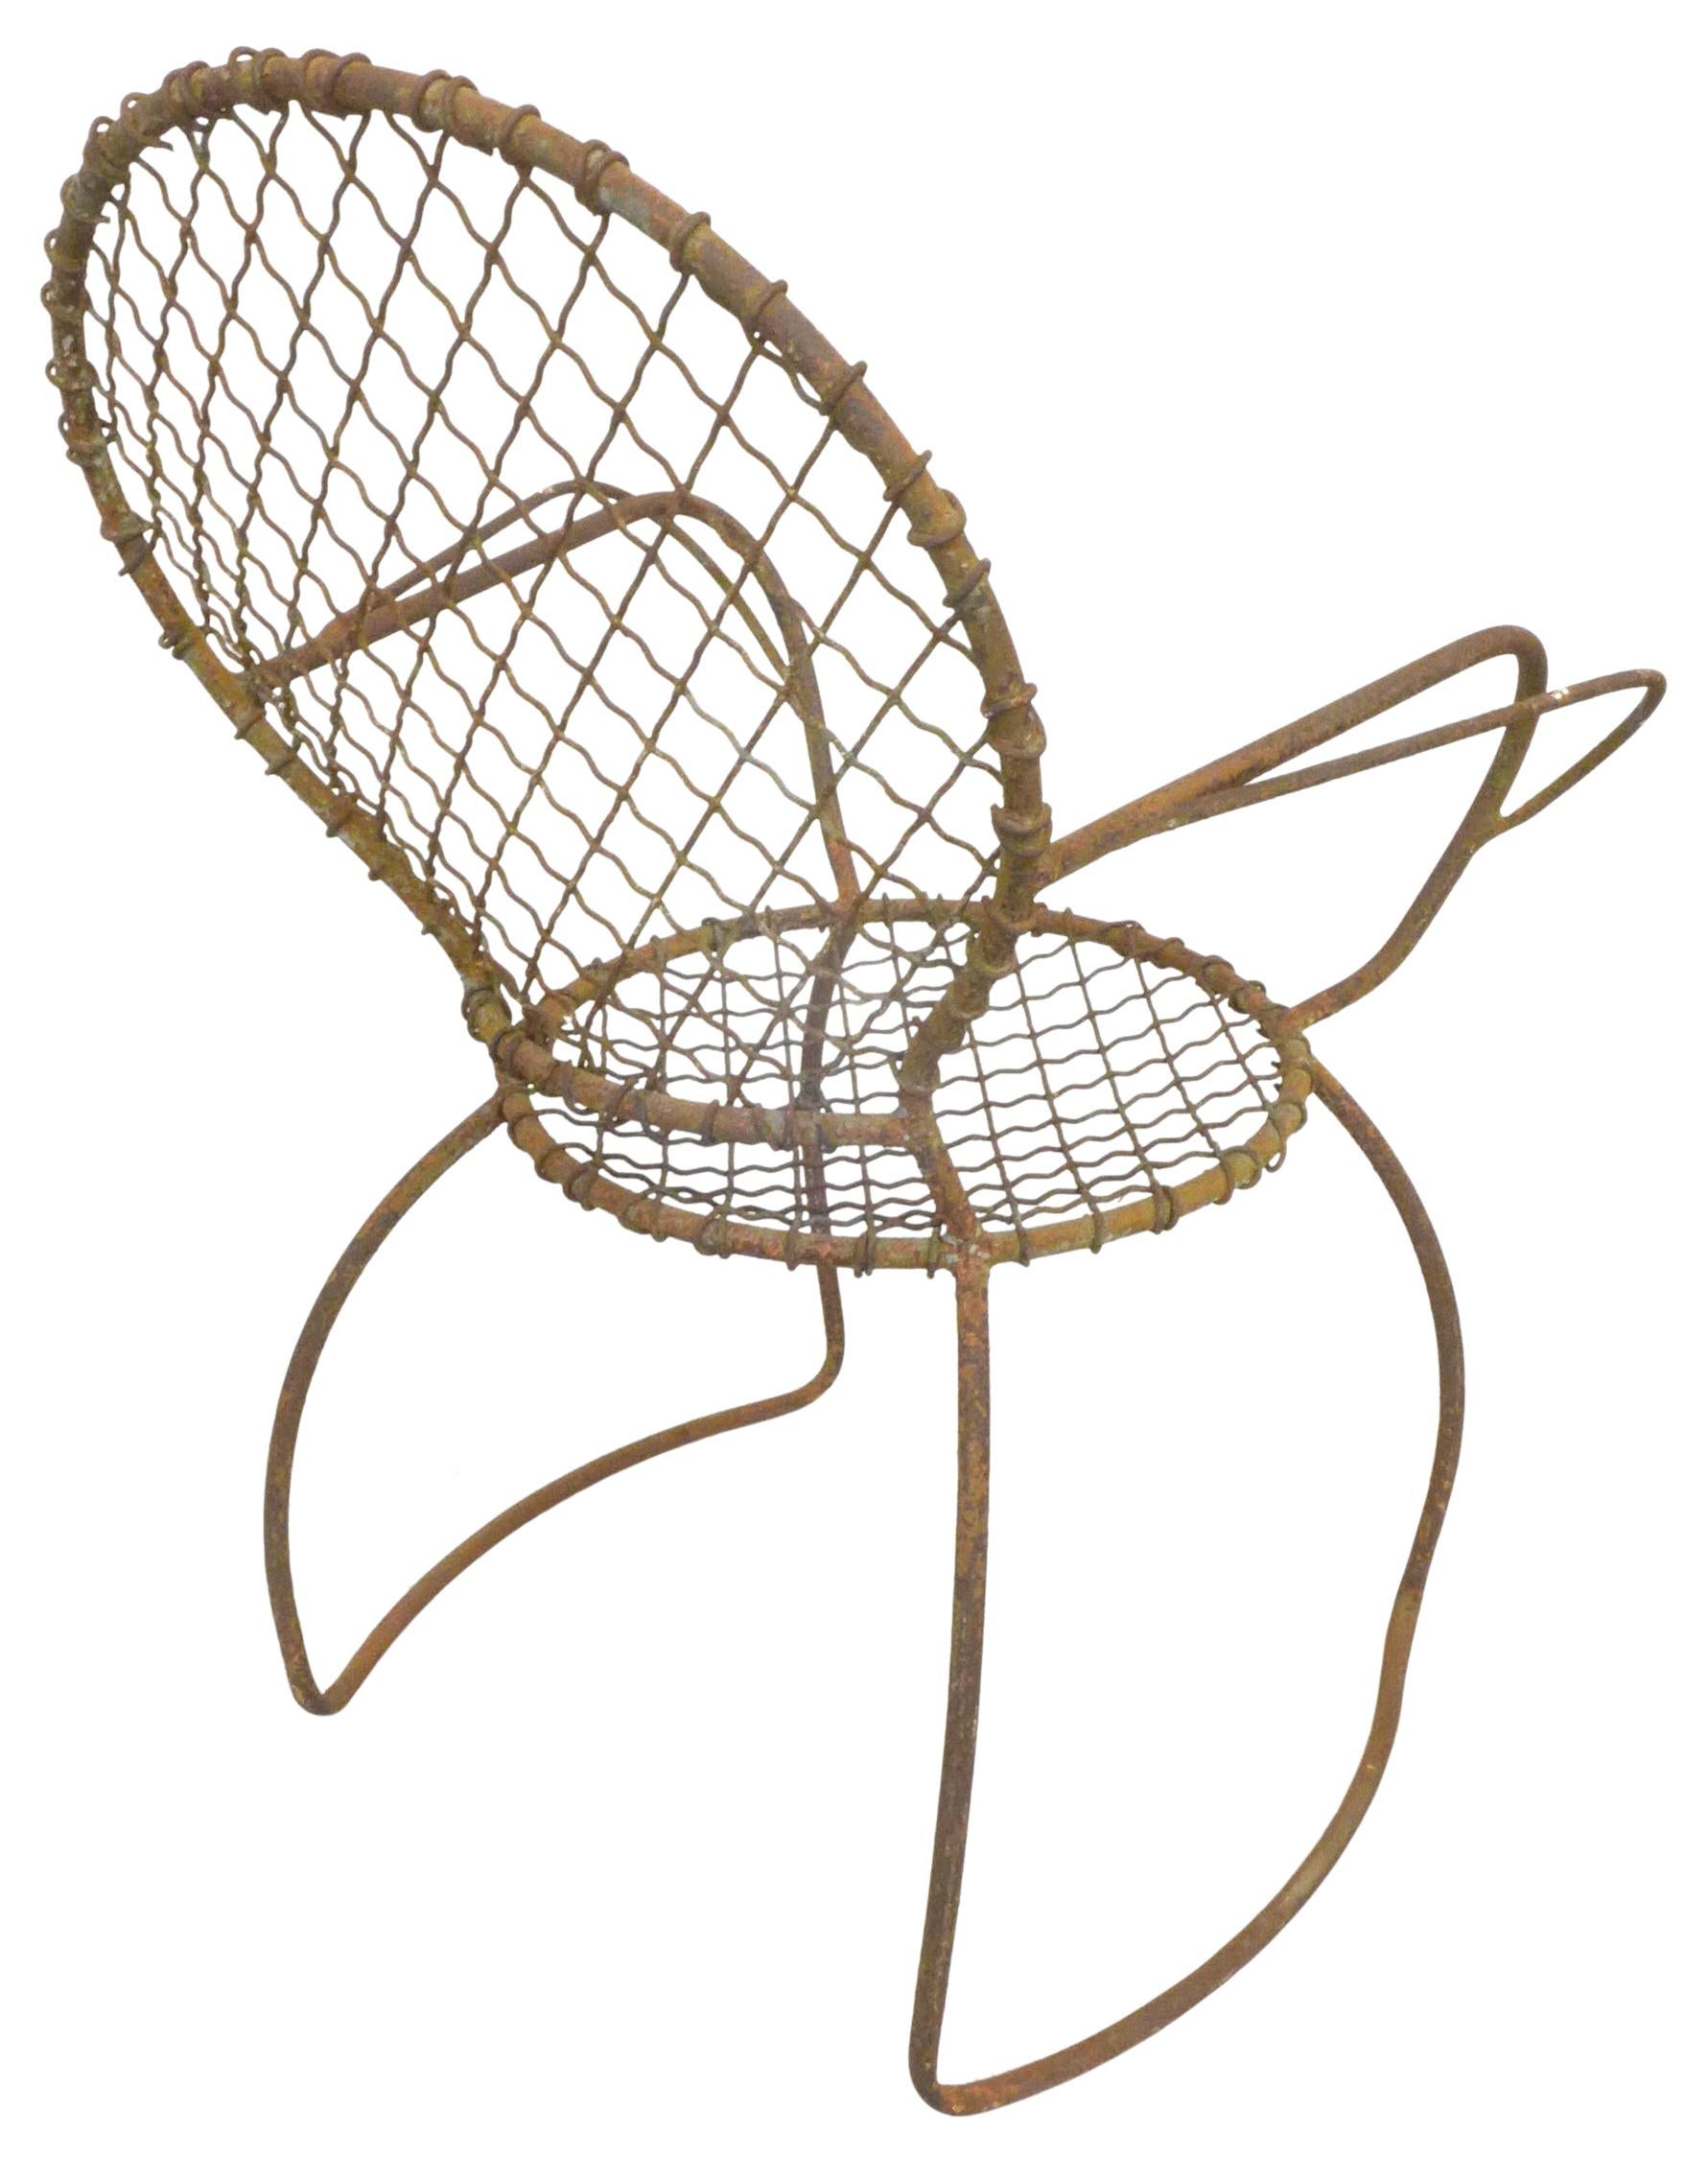 North American Sculptural Iron Garden Chair For Sale